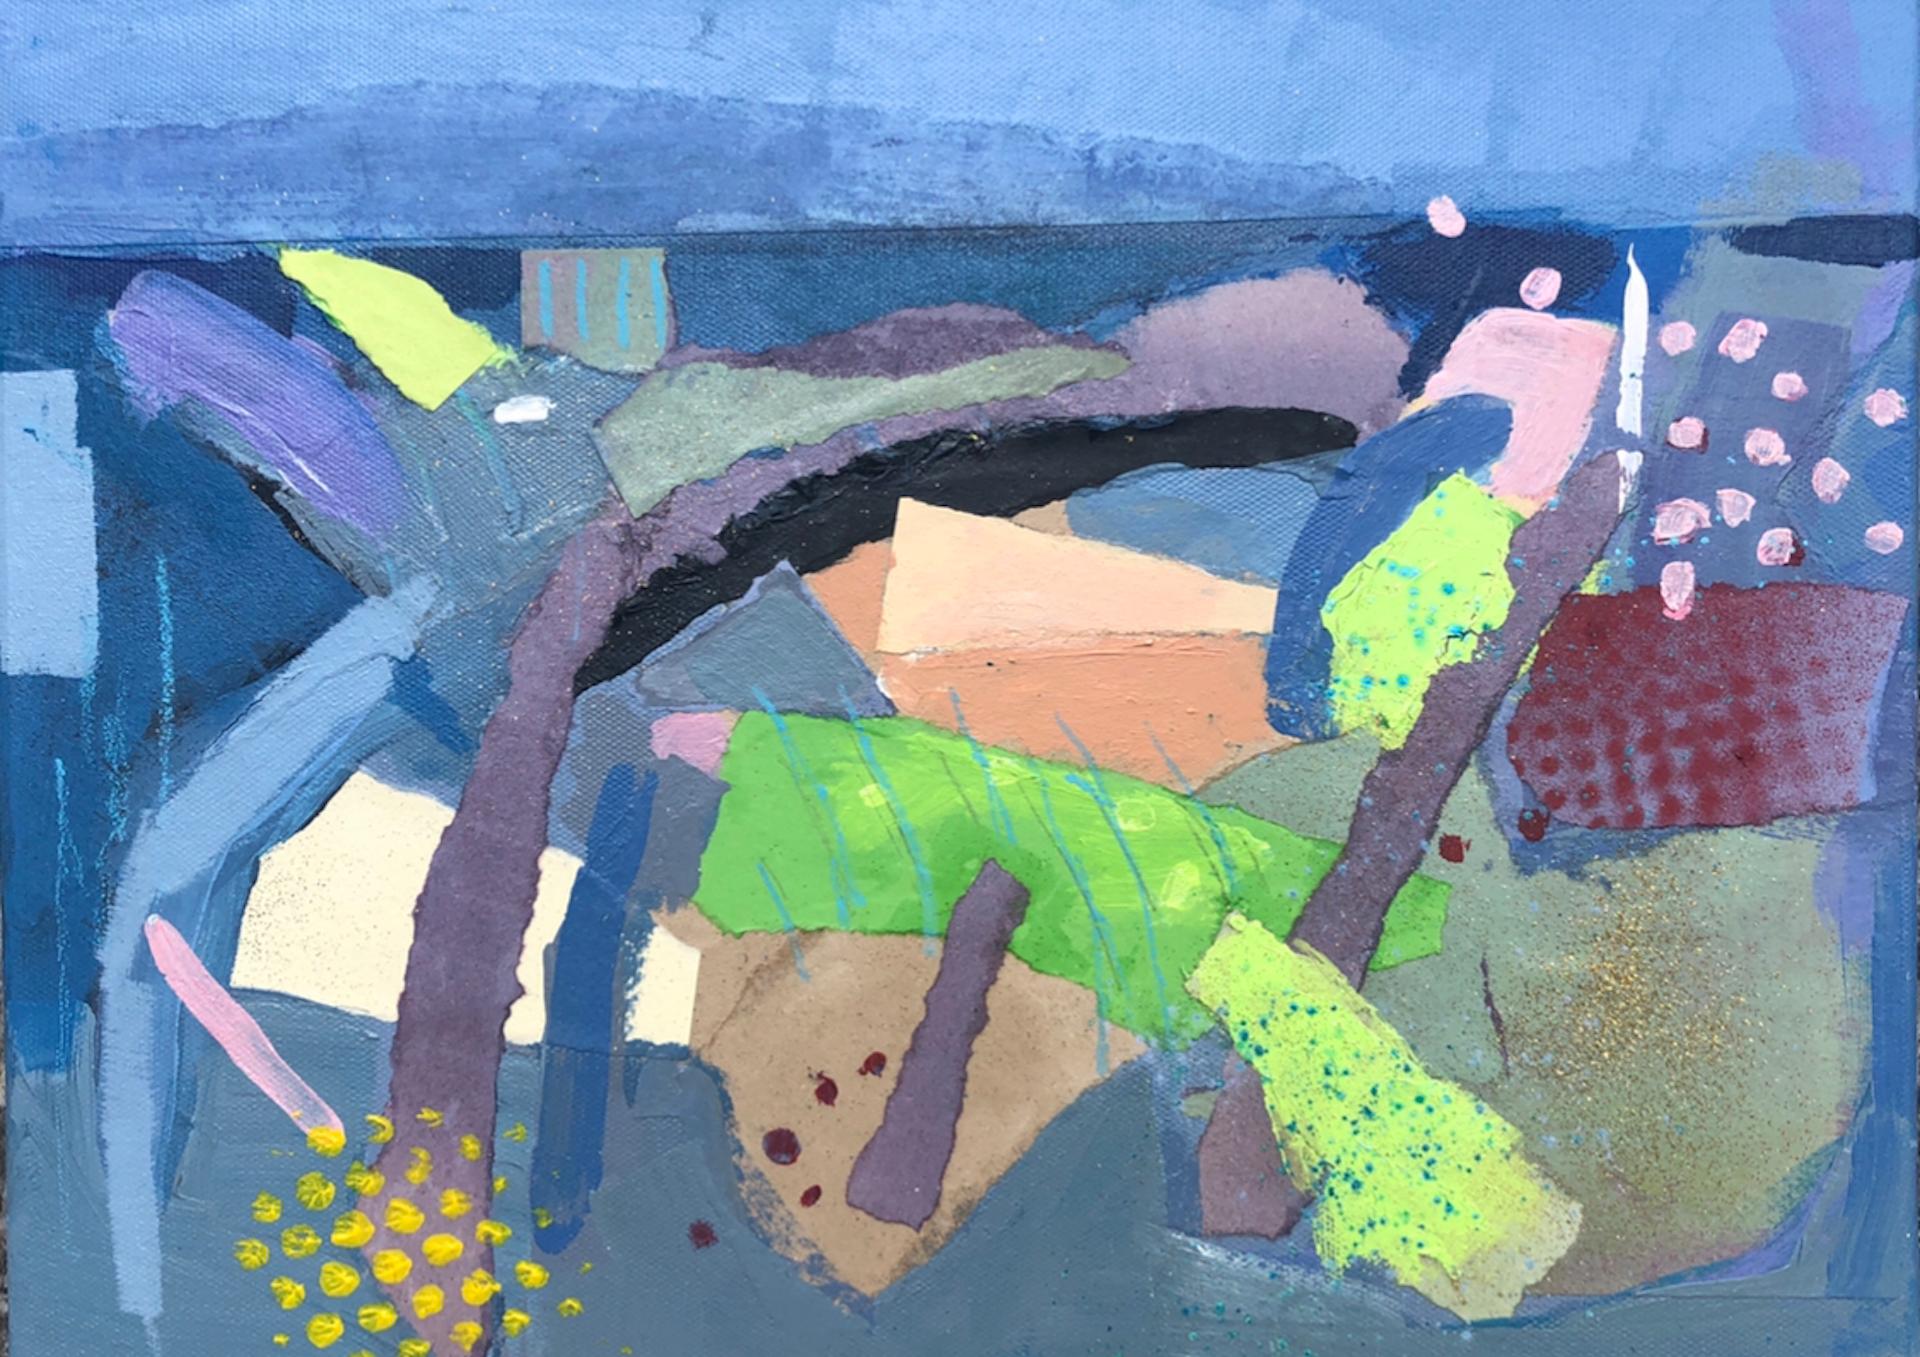 Maggie LaPorte Banks.
Summer colours of Dartmoor.
Acrylic, collage, printmaking, mixed medium on canvas.
W. 40 cm x H. 30cm x D. 2 cm .
Unframed canvas.
The study for this piece of work was made on Dartmoor on a gloriously sunny day in July.
Hazy